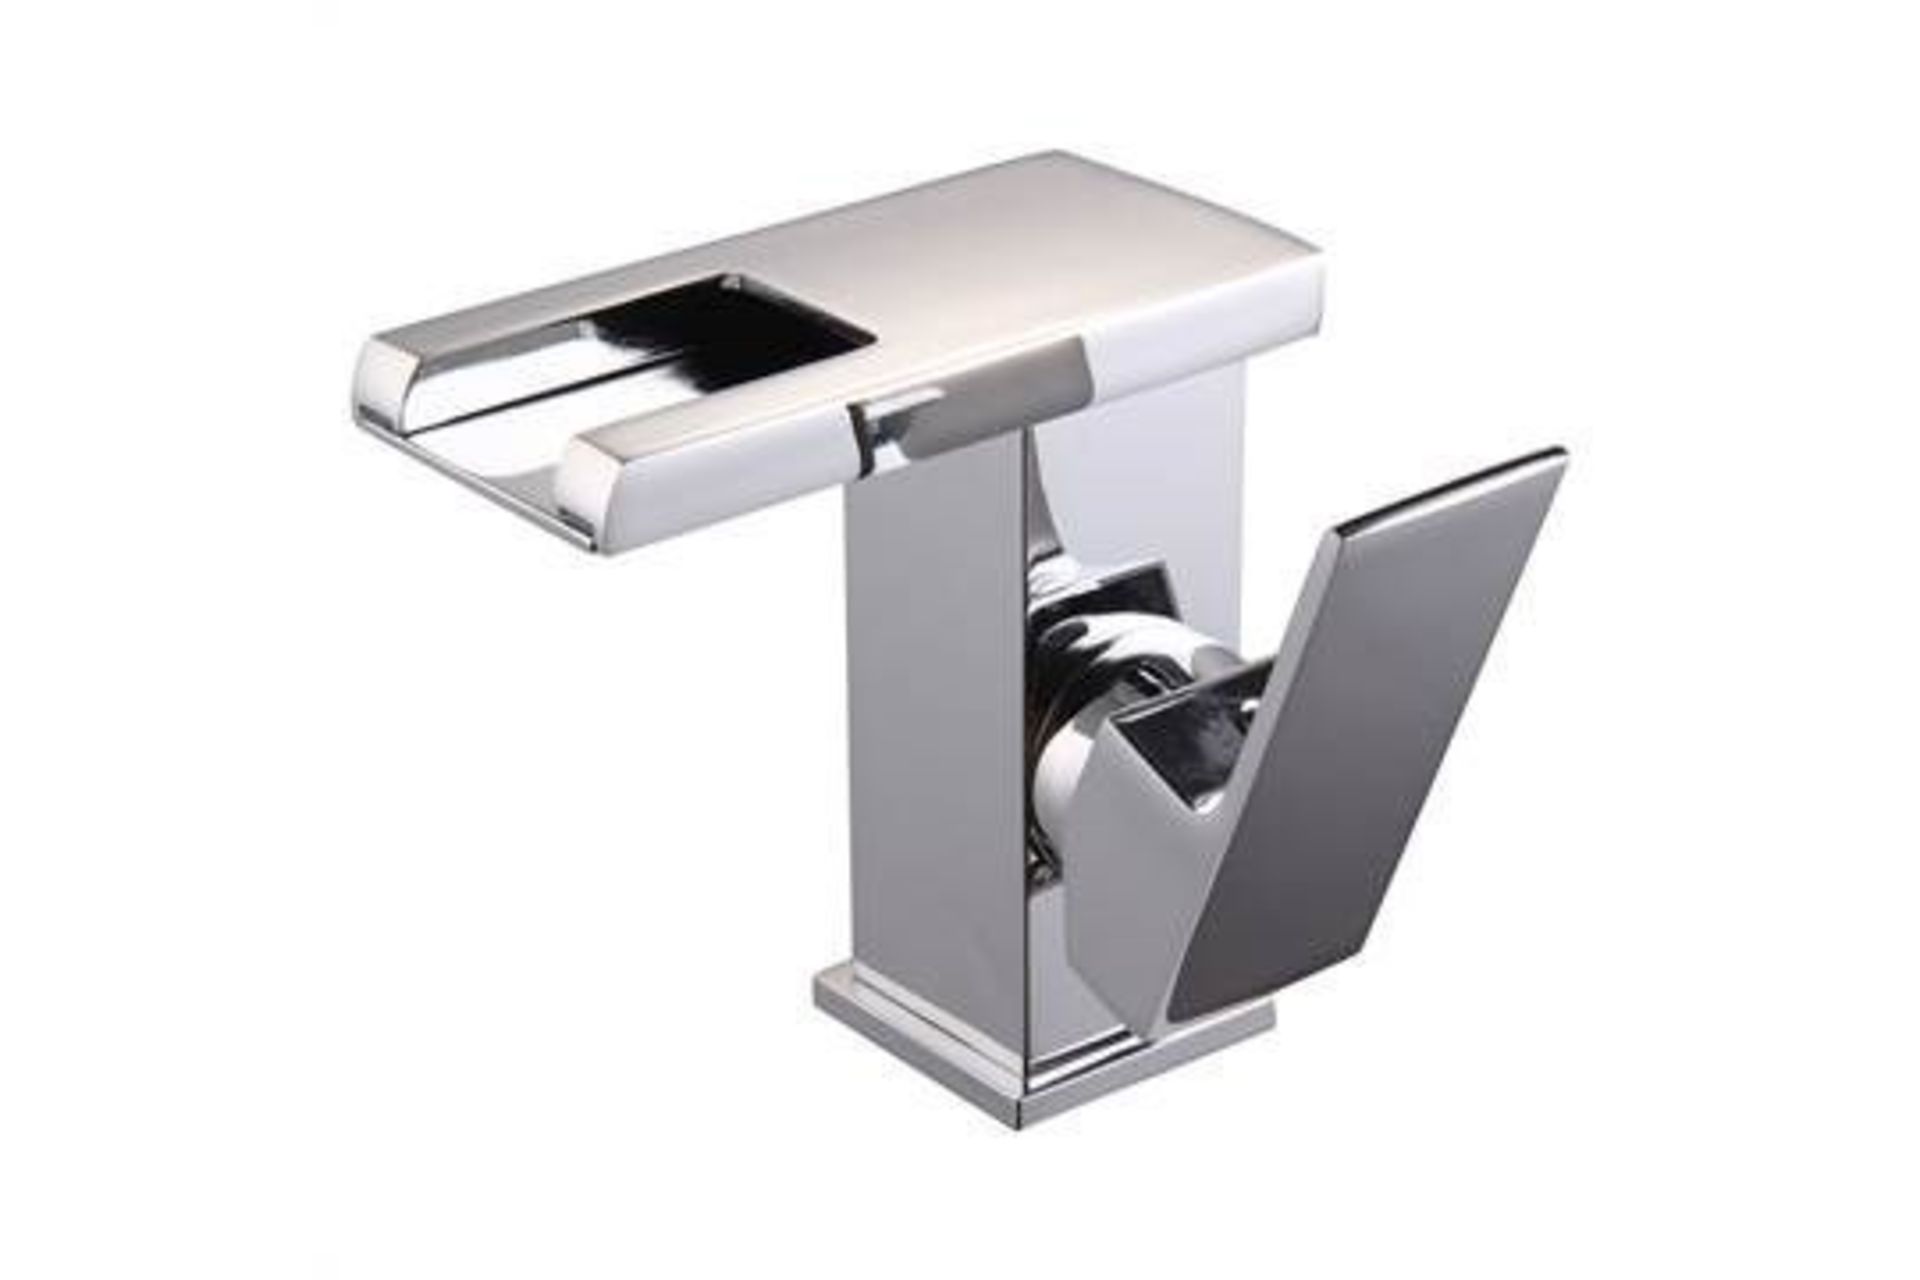 LED Waterfall Bathroom Basin Mixer Tap. RRP £229.99.Easy to install and clean. All copper ... LED - Image 2 of 2